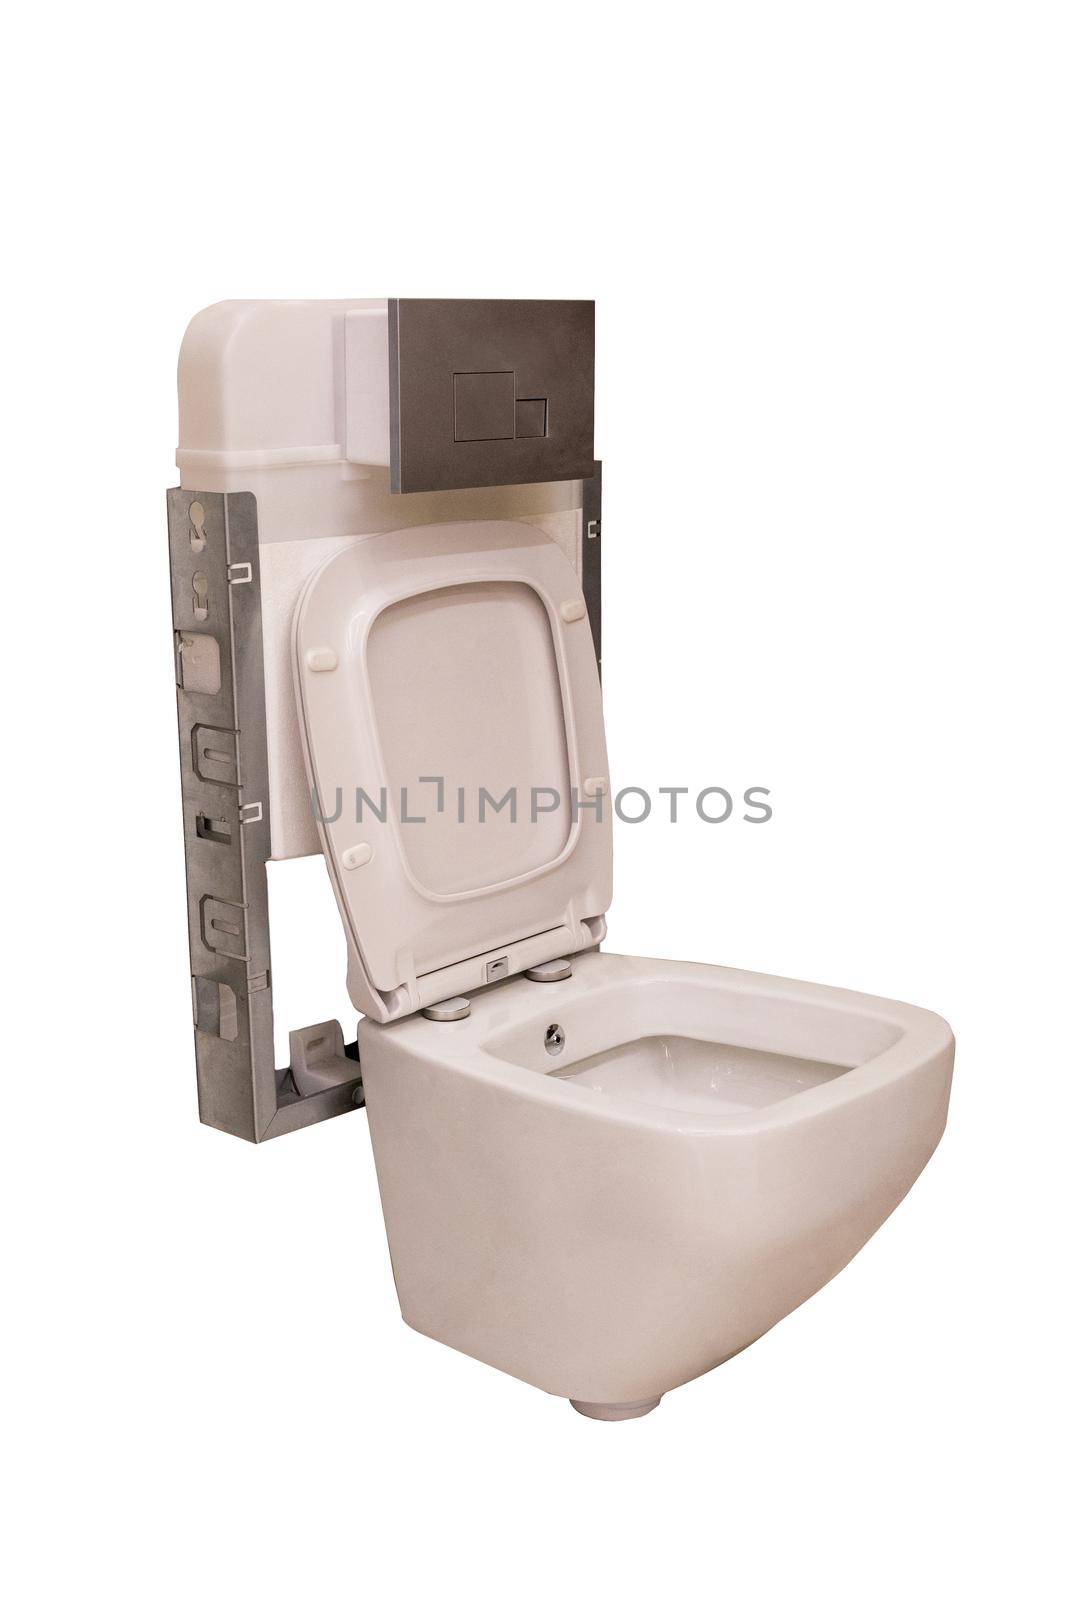 New clean white ceramic toilet bowl with white background by ferhad